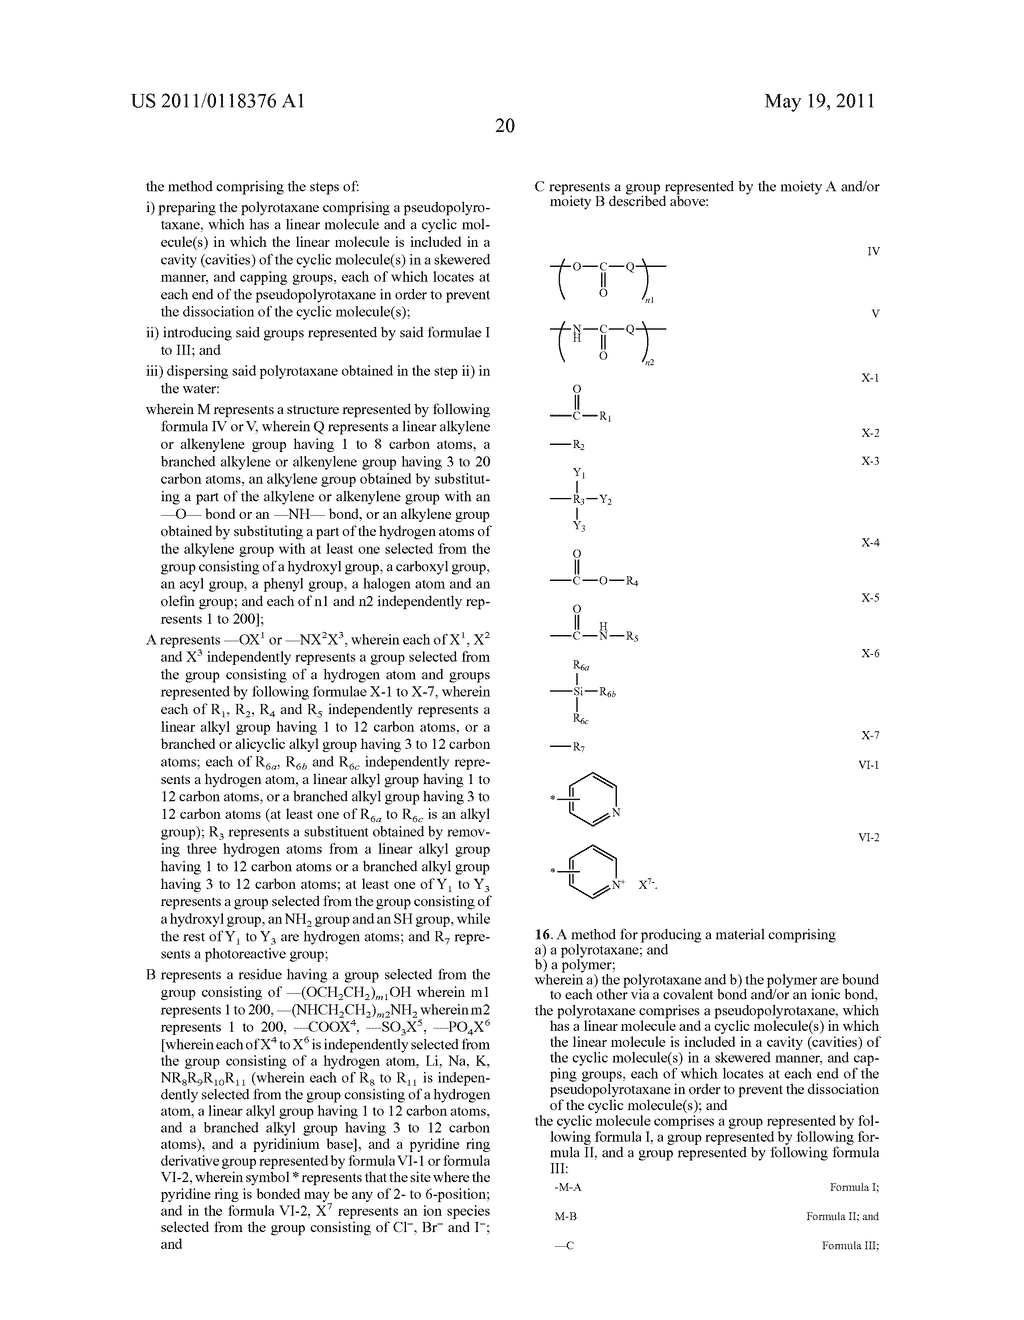 POLYROTAXANE, AQUEOUS POLYROTAXANE DISPERSION COMPOSITION, CROSSLINKED BODY OF POLYROTAXANE AND POLYMER AND METHOD FOR PRODUCING THE SAME - diagram, schematic, and image 22